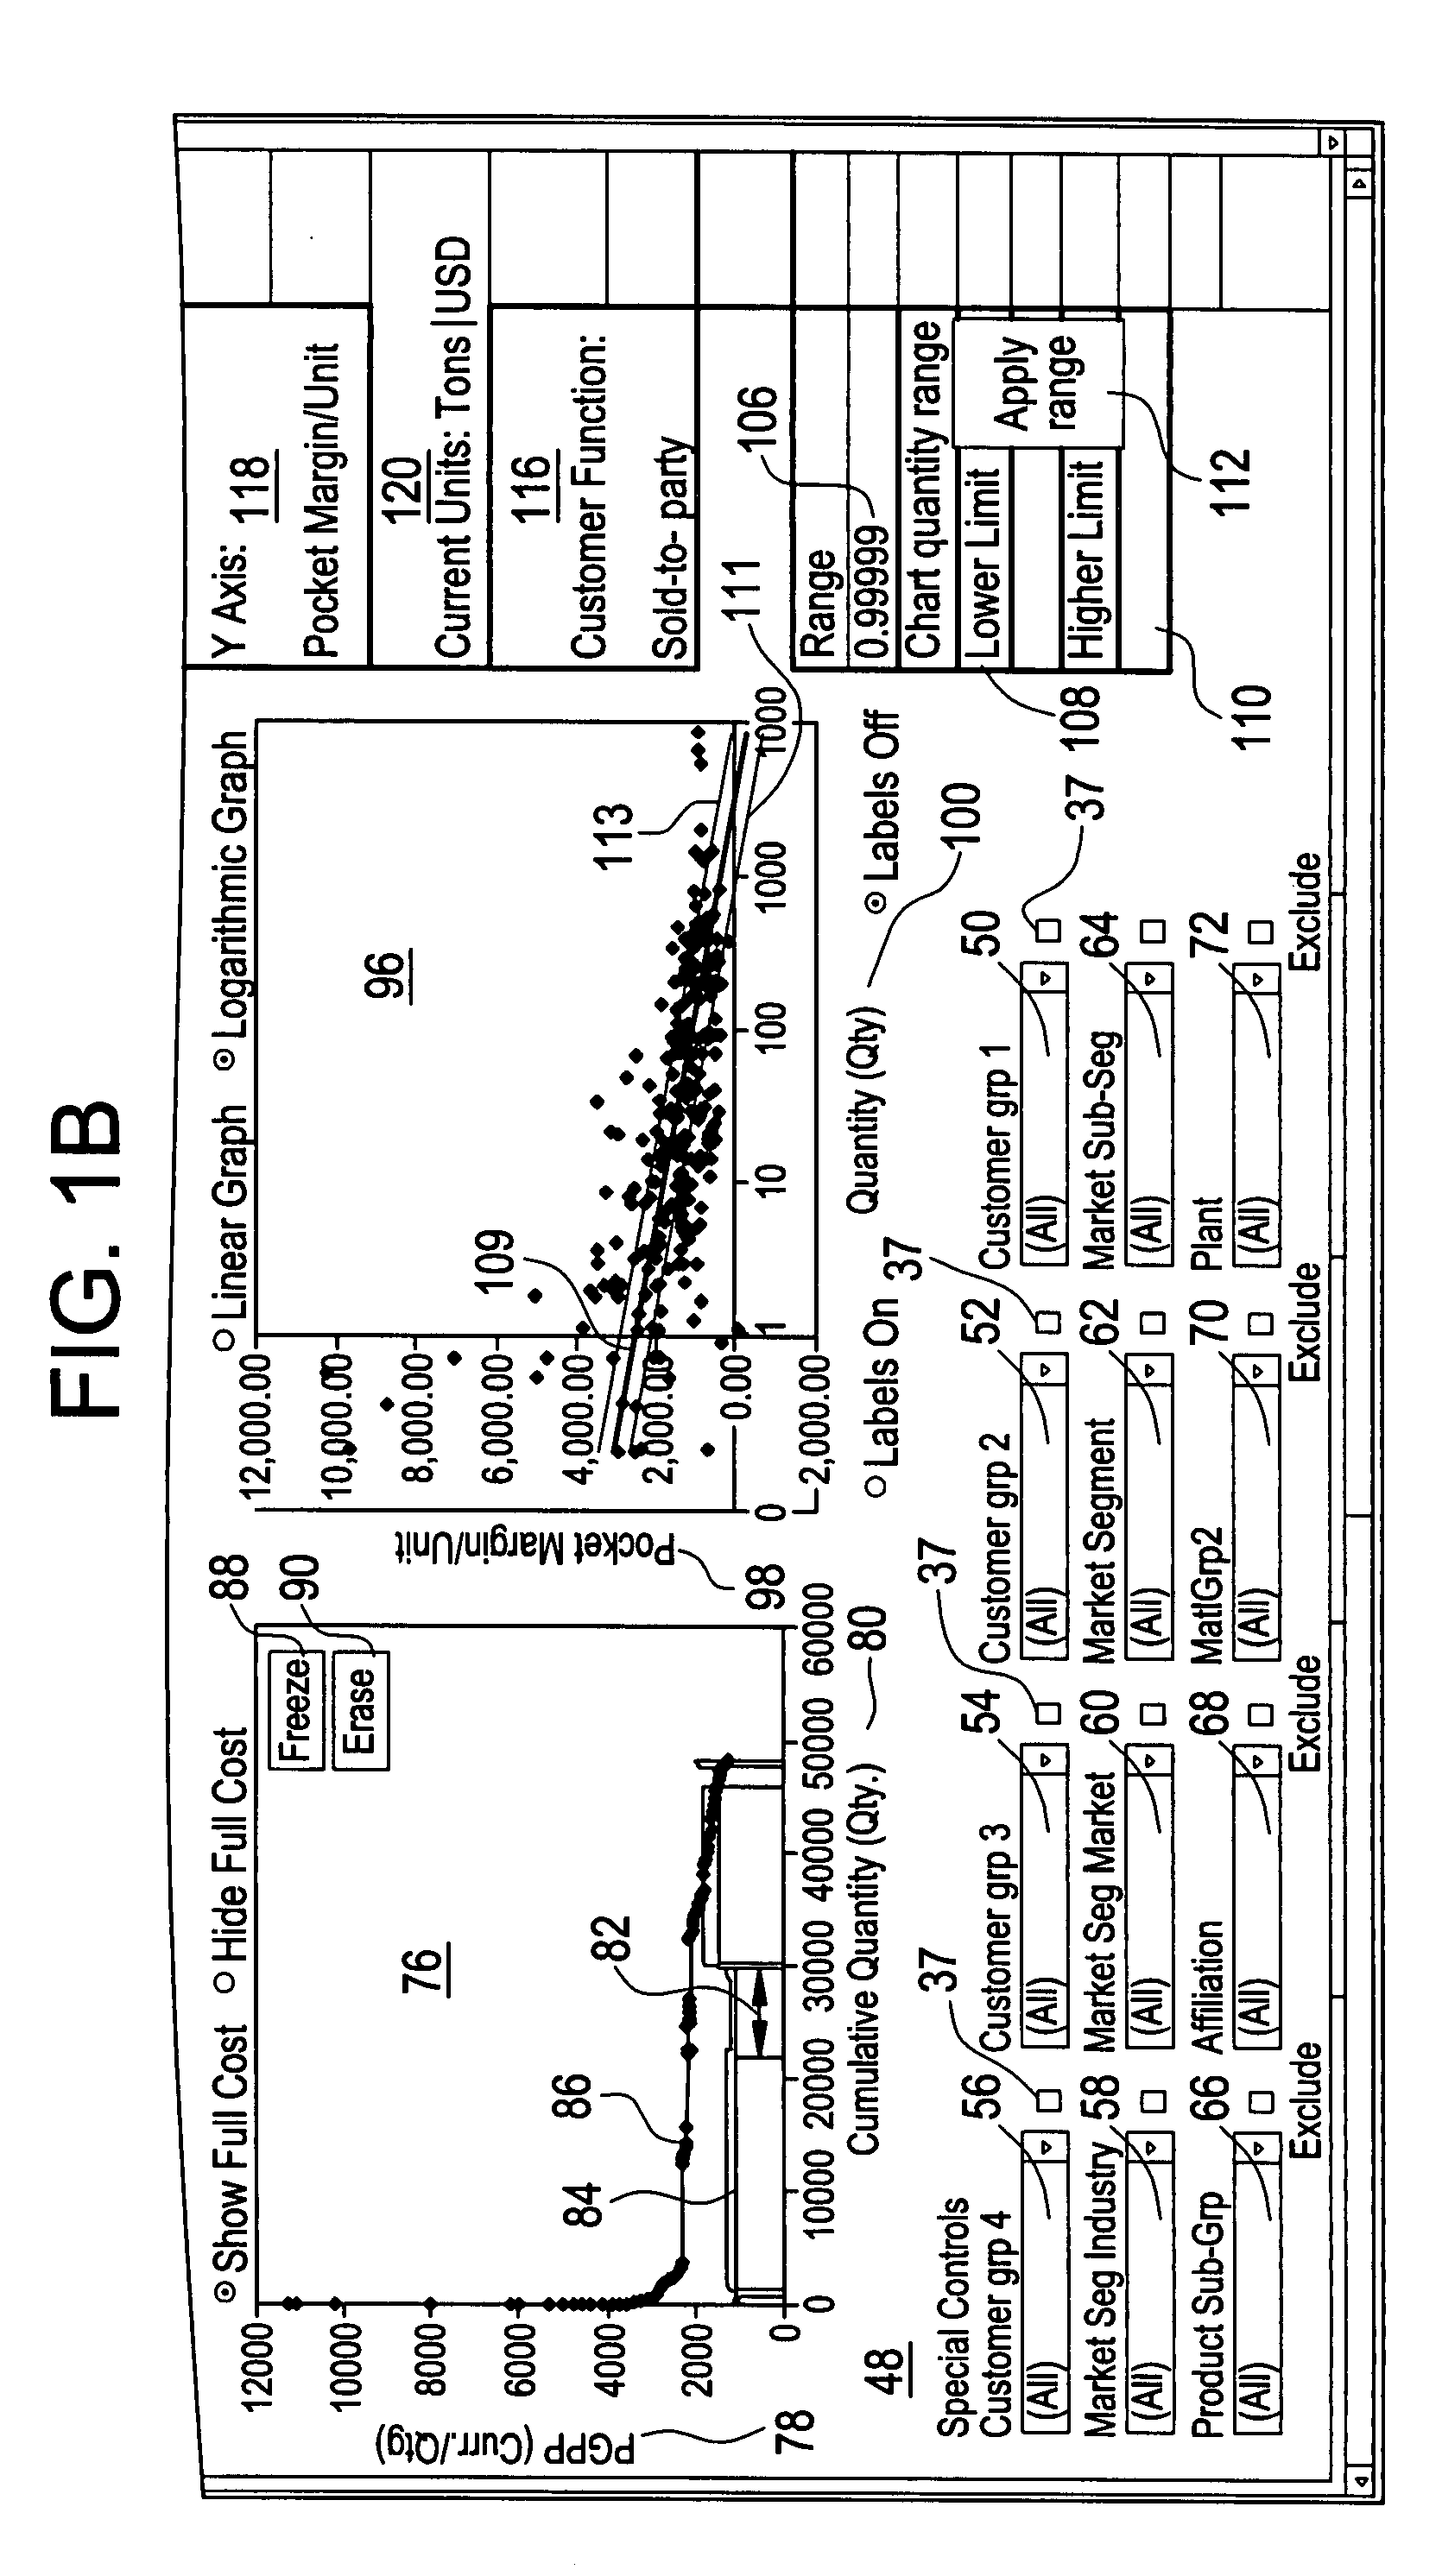 Sales transaction analysis tool and associated method of use